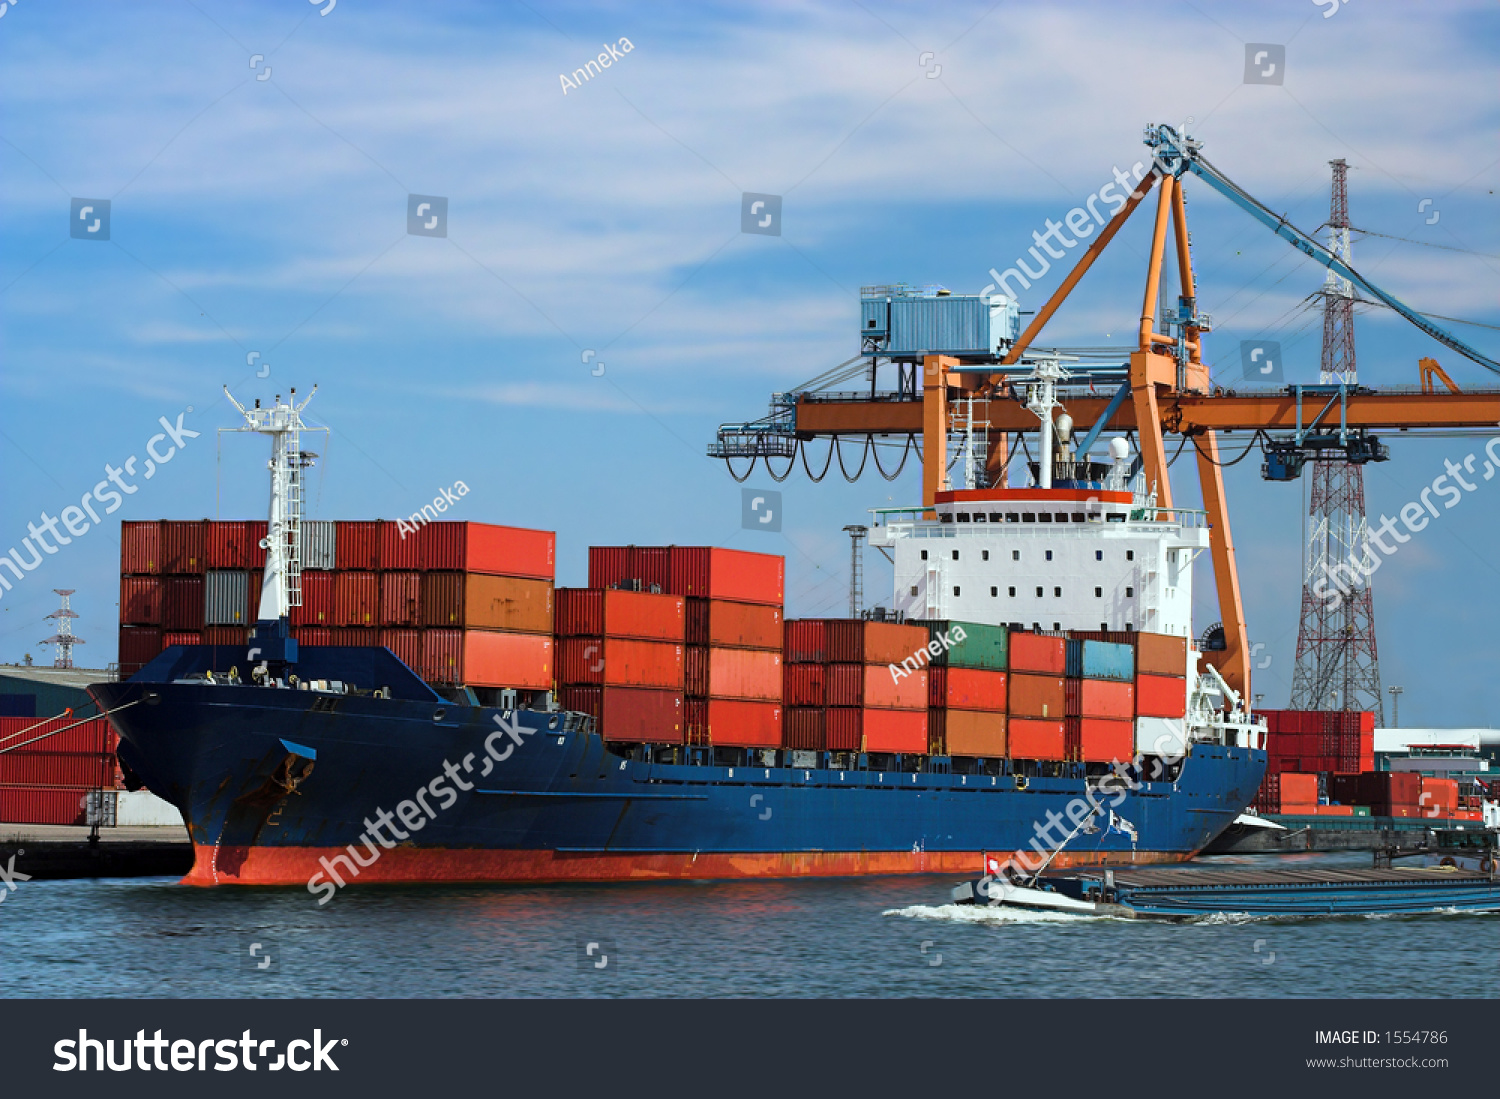 Large container ship in a dock at Antwerp harbor (logos and brandnames systematically removed) #1554786